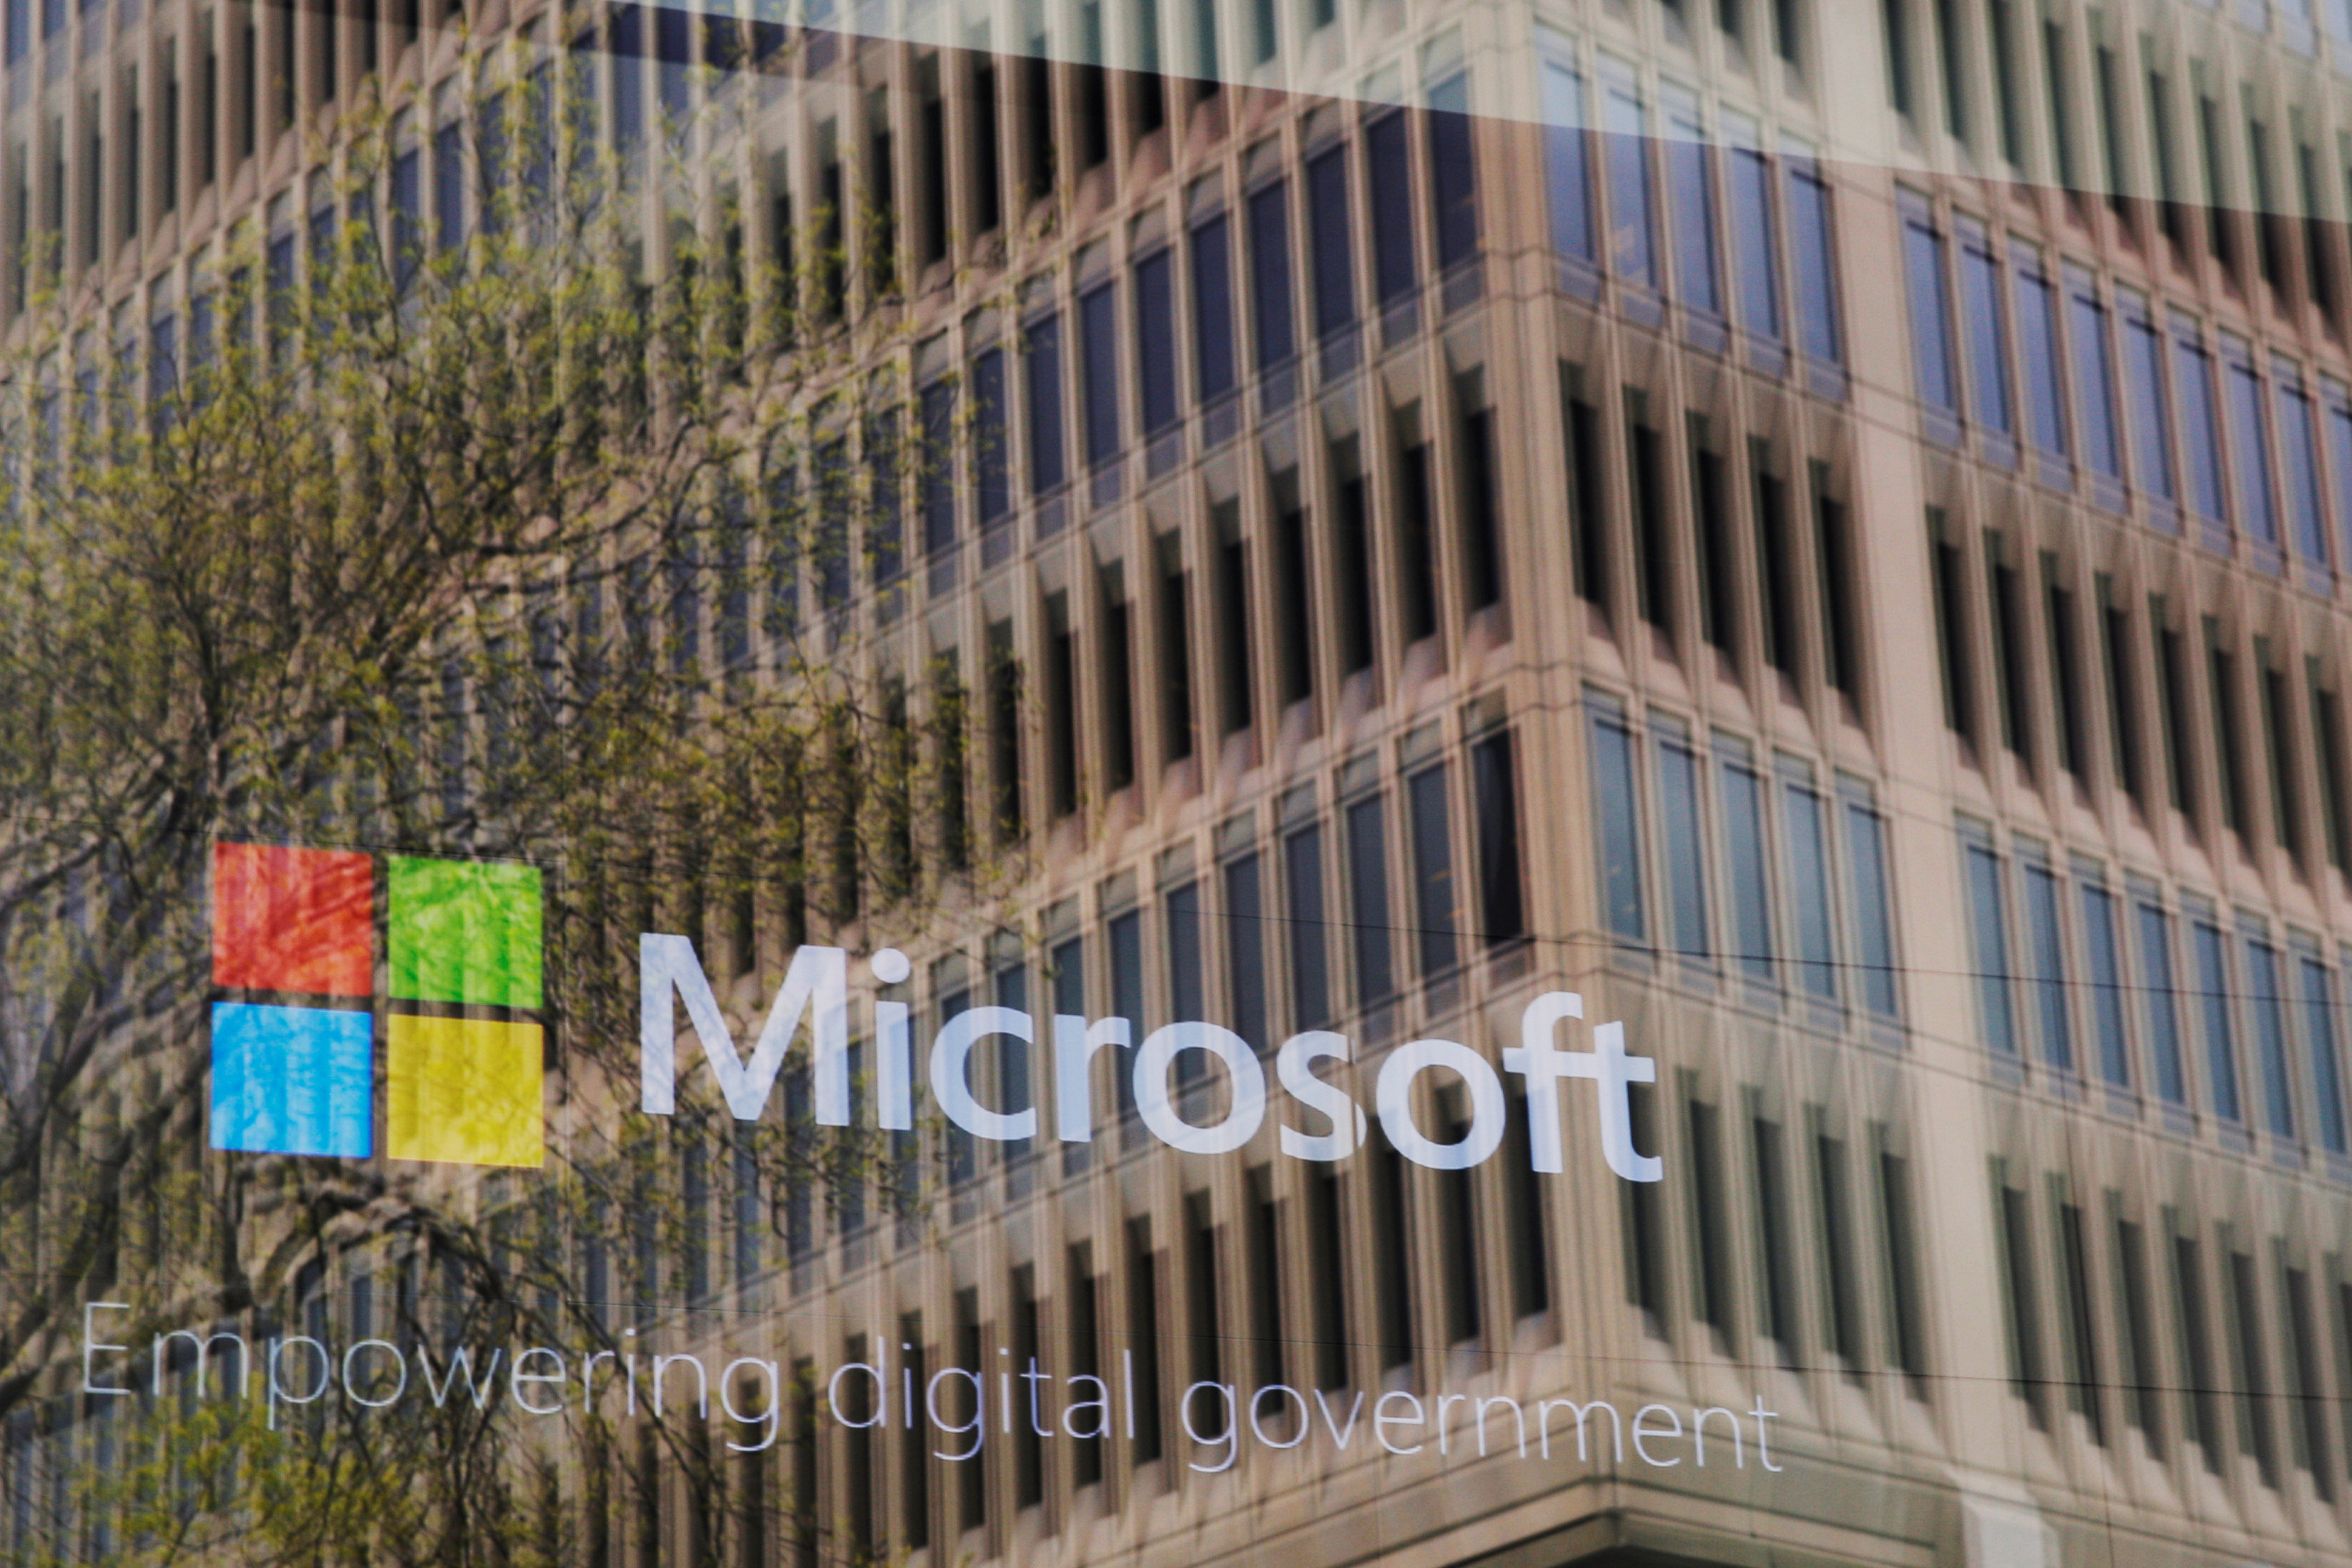 Microsoft plans to cut 'thousands' of jobs